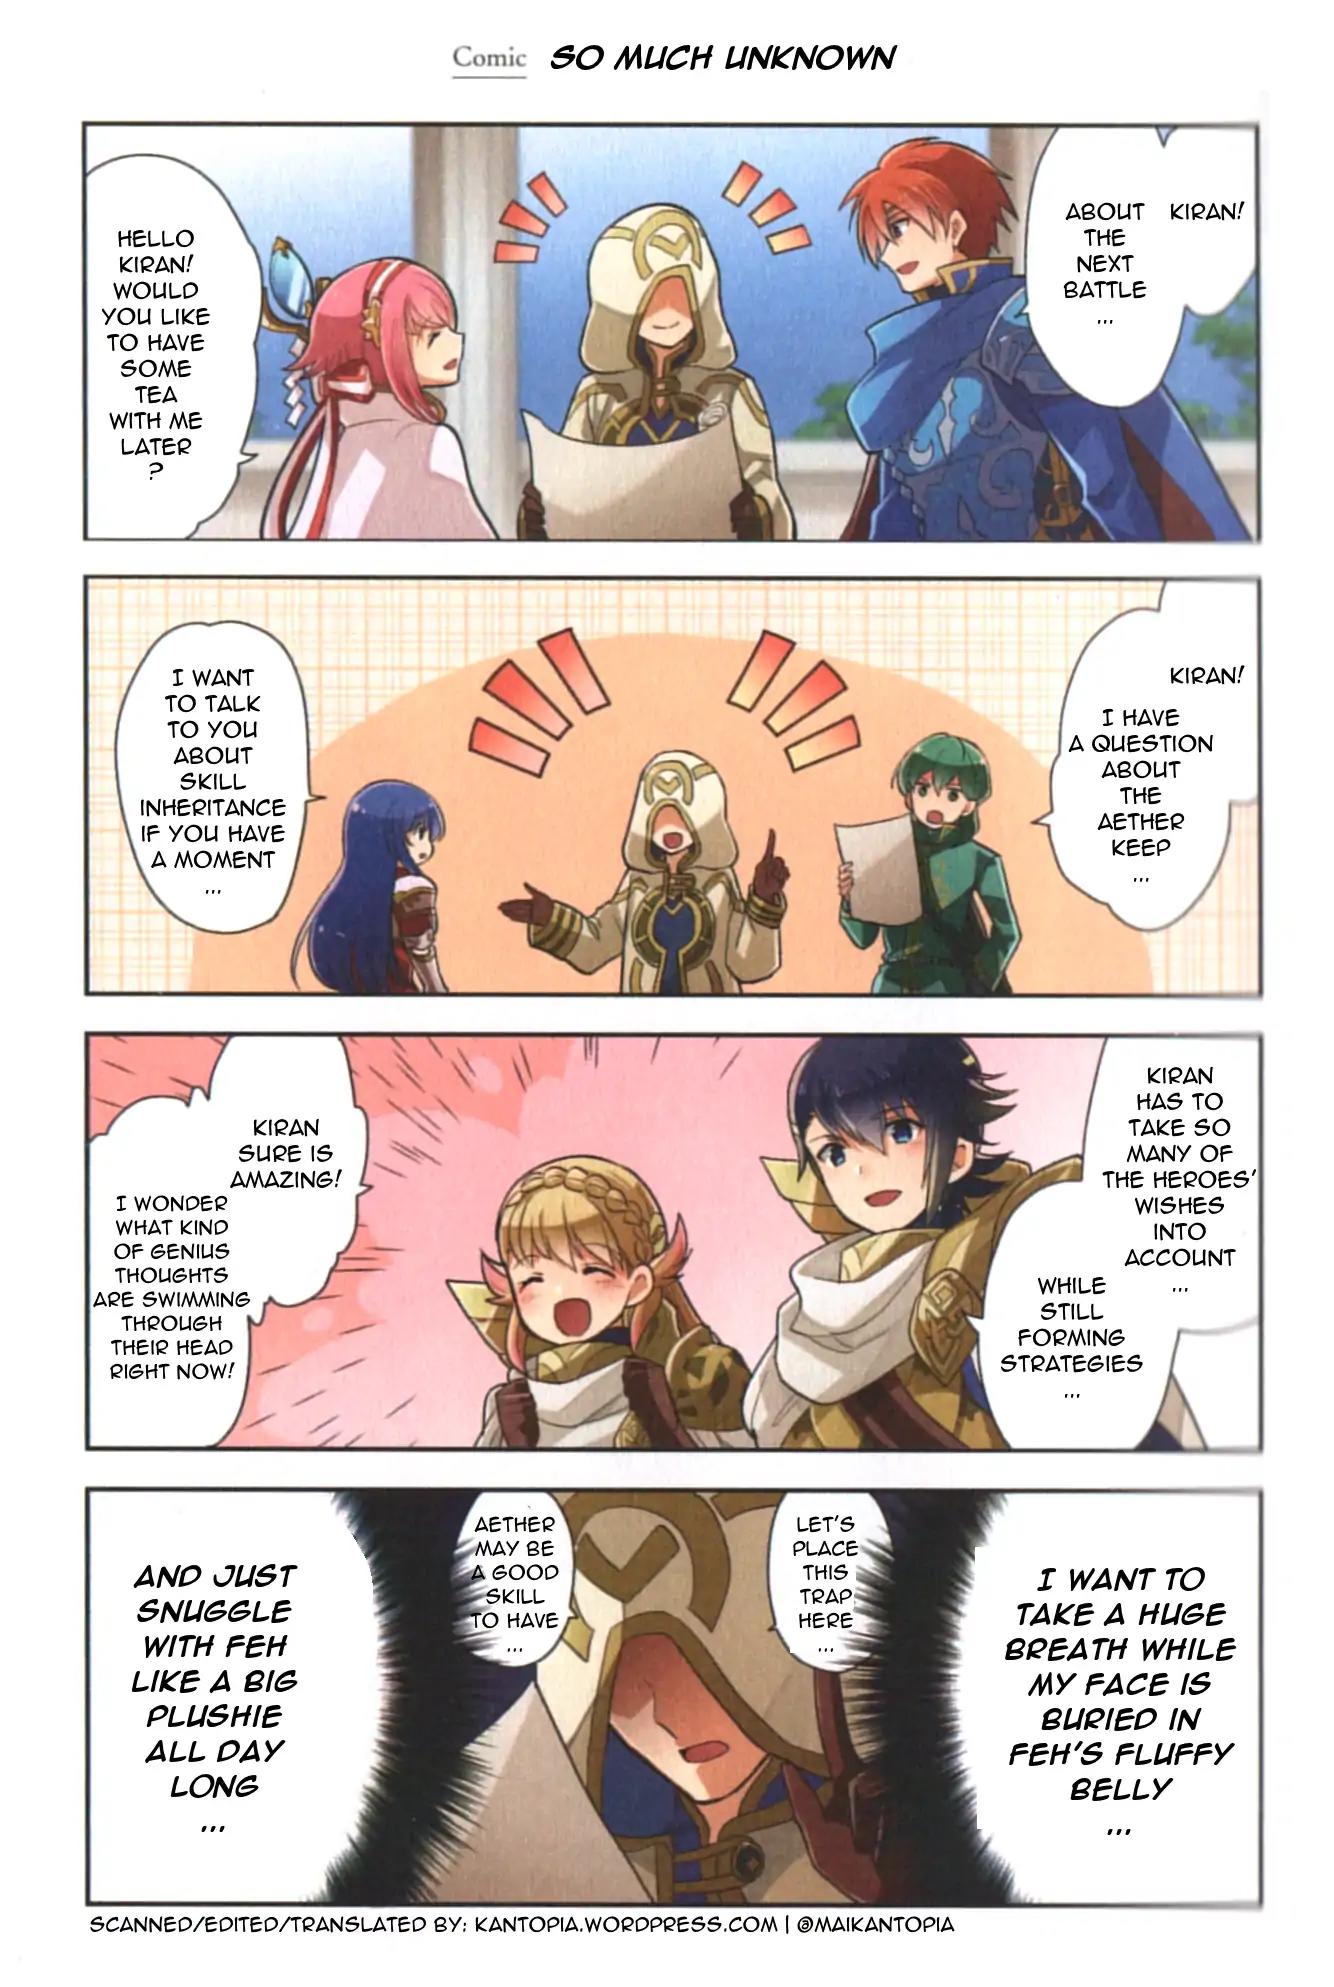 Fire Emblem Heroes Daily Lives of the Heroes Vol.1 Chapter 0.01: Character comic: